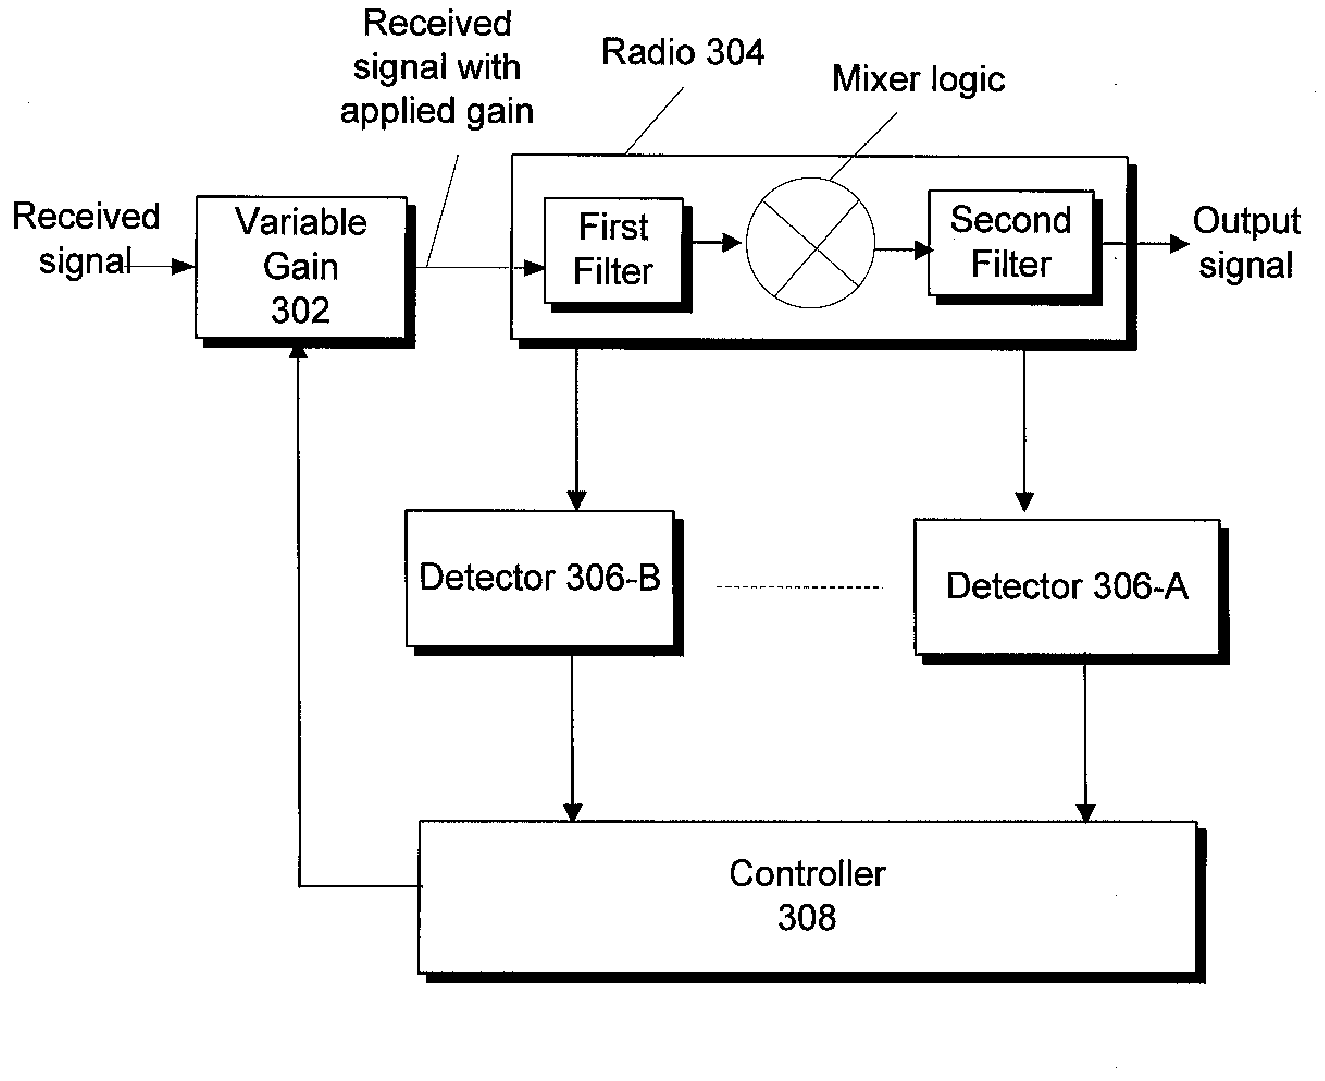 Techniques to deterministically reduce signal interference